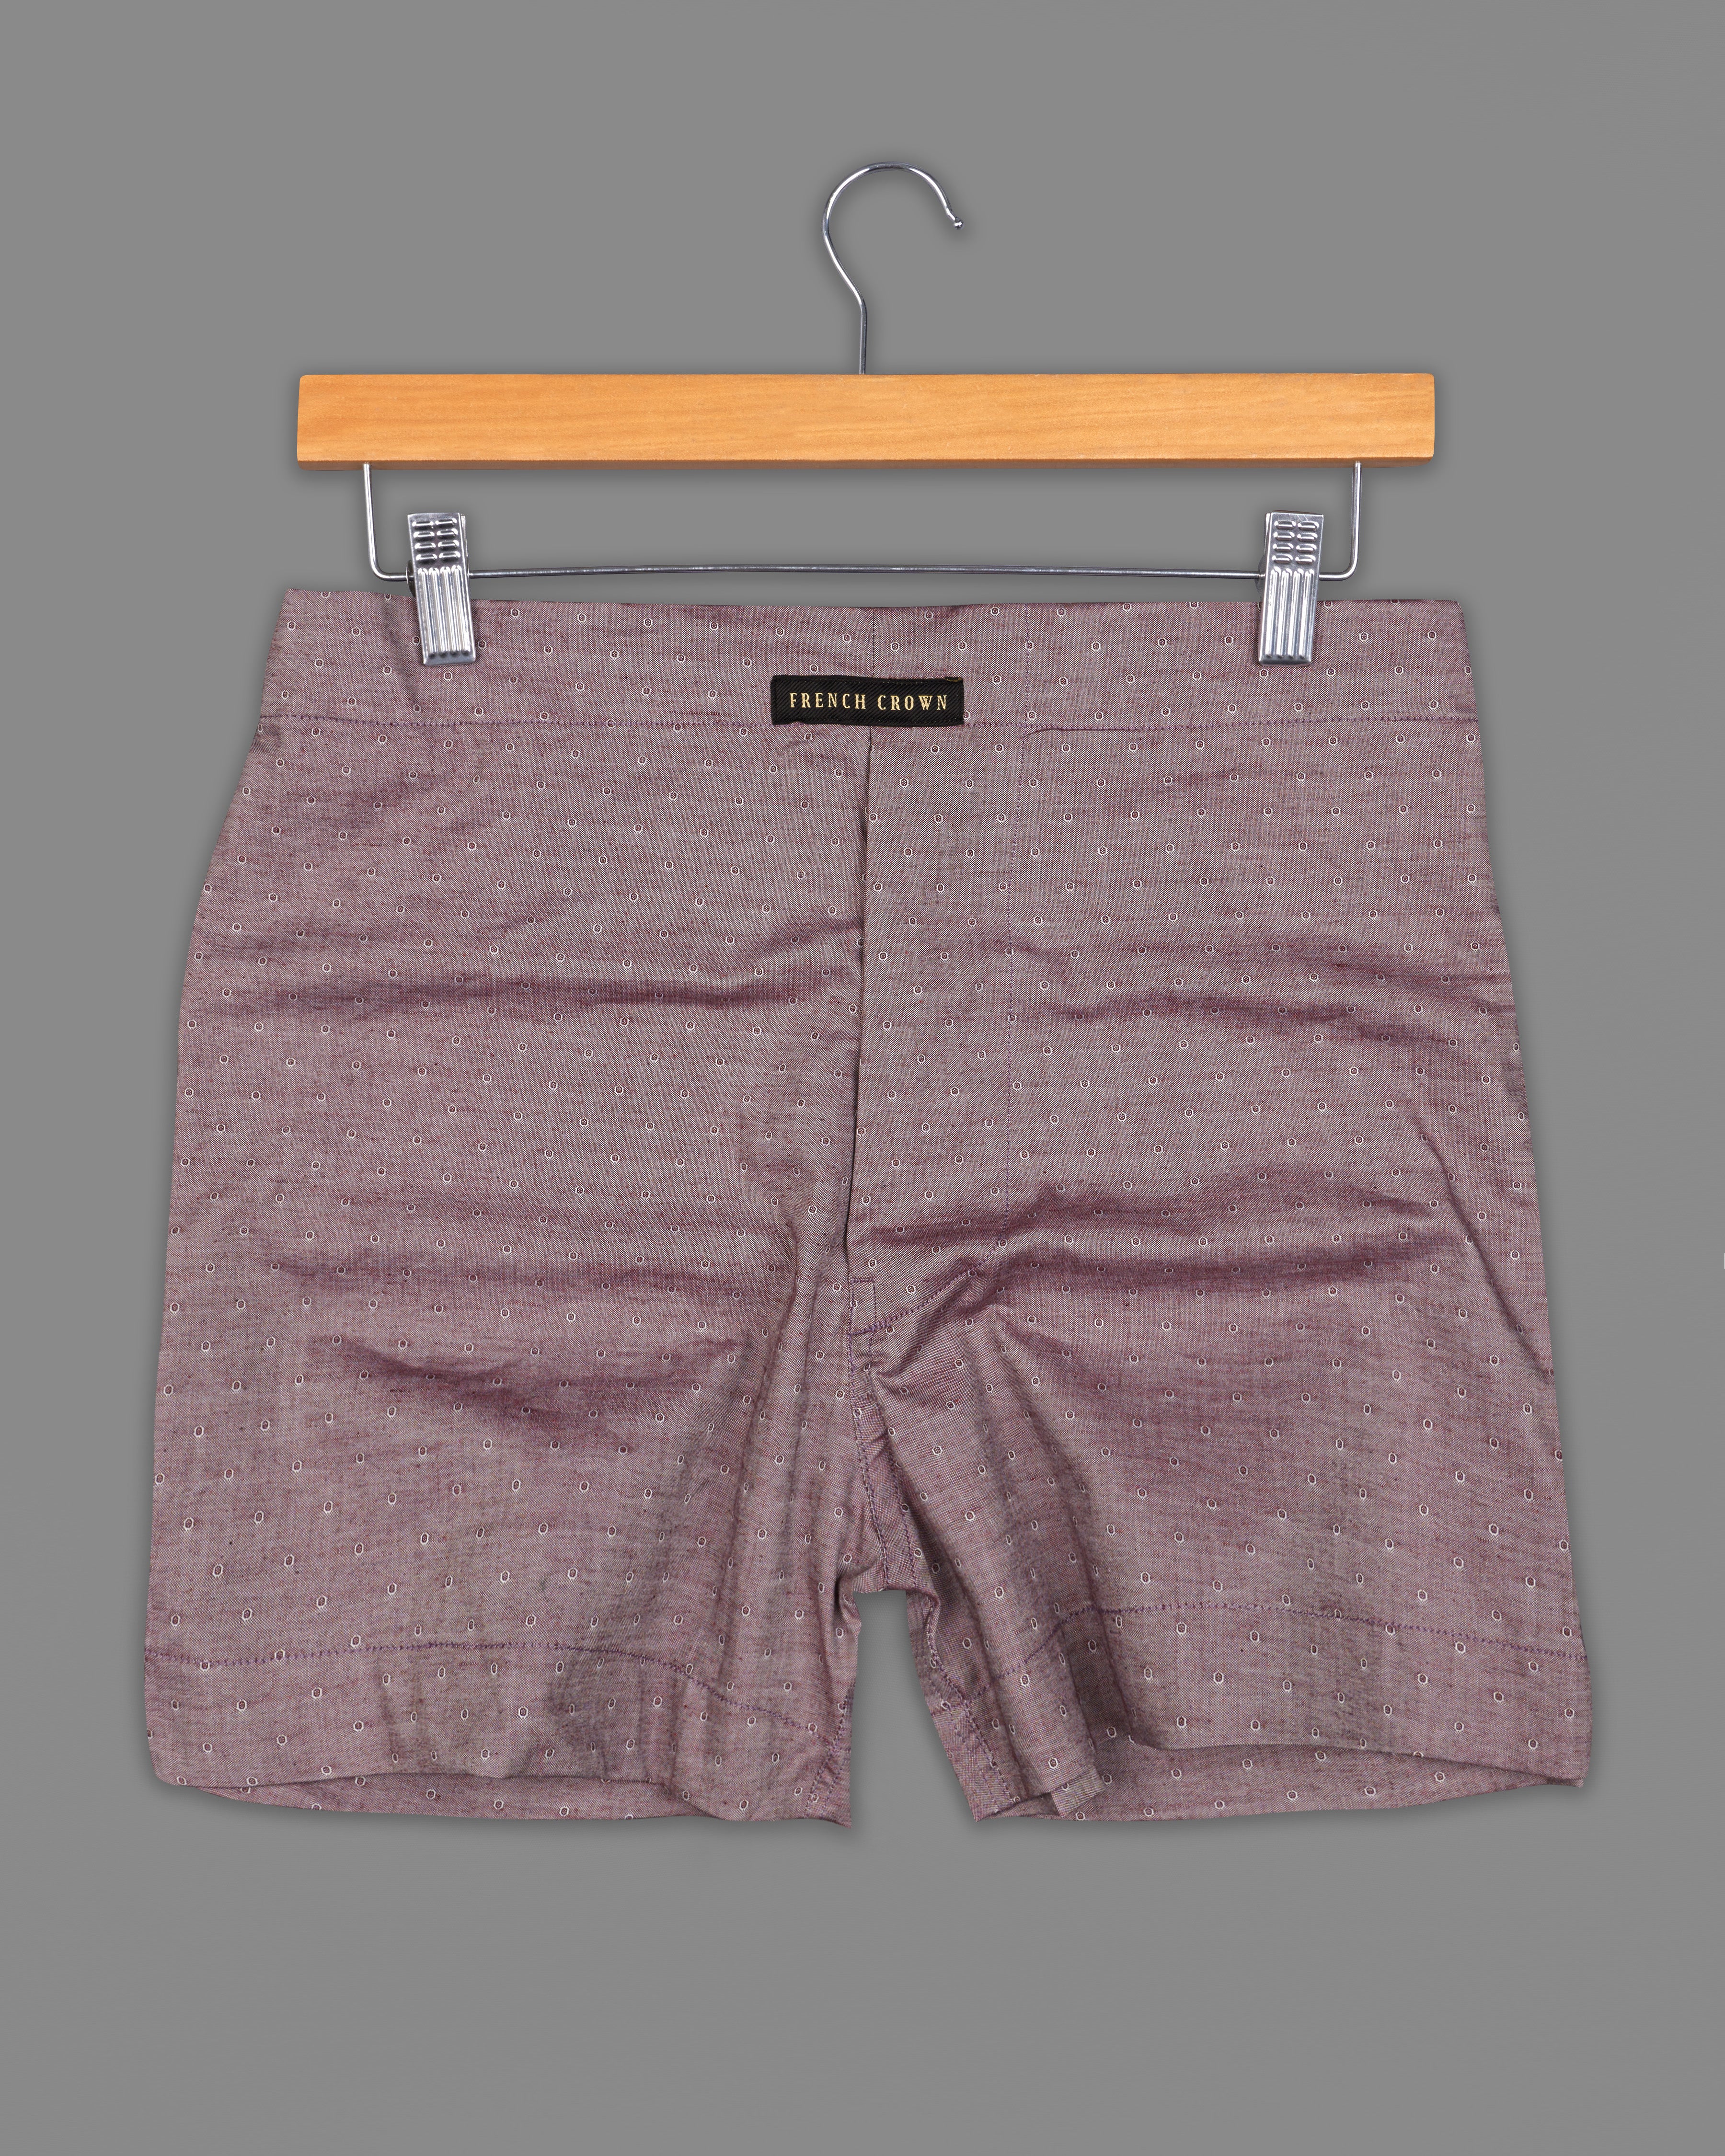 Cinereous Brown Dobby Boxers with Gainsboro Sky Blue Luxurious Linen Boxers BX497-BX498-28, BX497-BX498-30, BX497-BX498-32, BX497-BX498-34, BX497-BX498-36, BX497-BX498-38, BX497-BX498-40, BX497-BX498-42, BX497-BX498-44